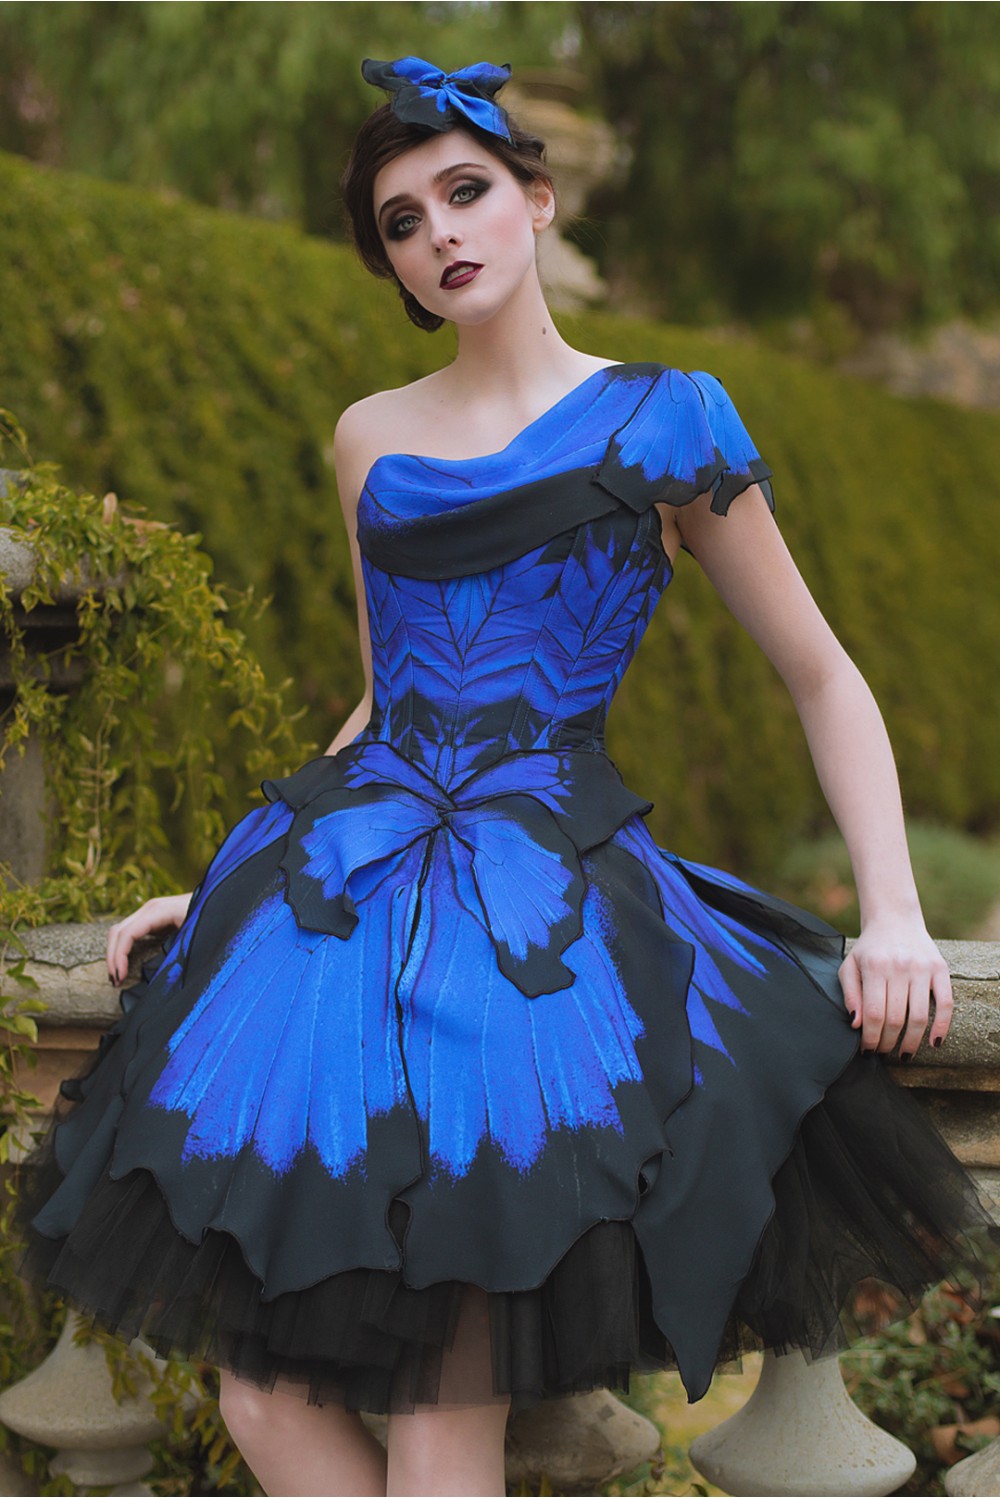 The Absolutely Stunning Dresses And Corsets Inspired By Butterfly Wings Of Bibian Blue 12